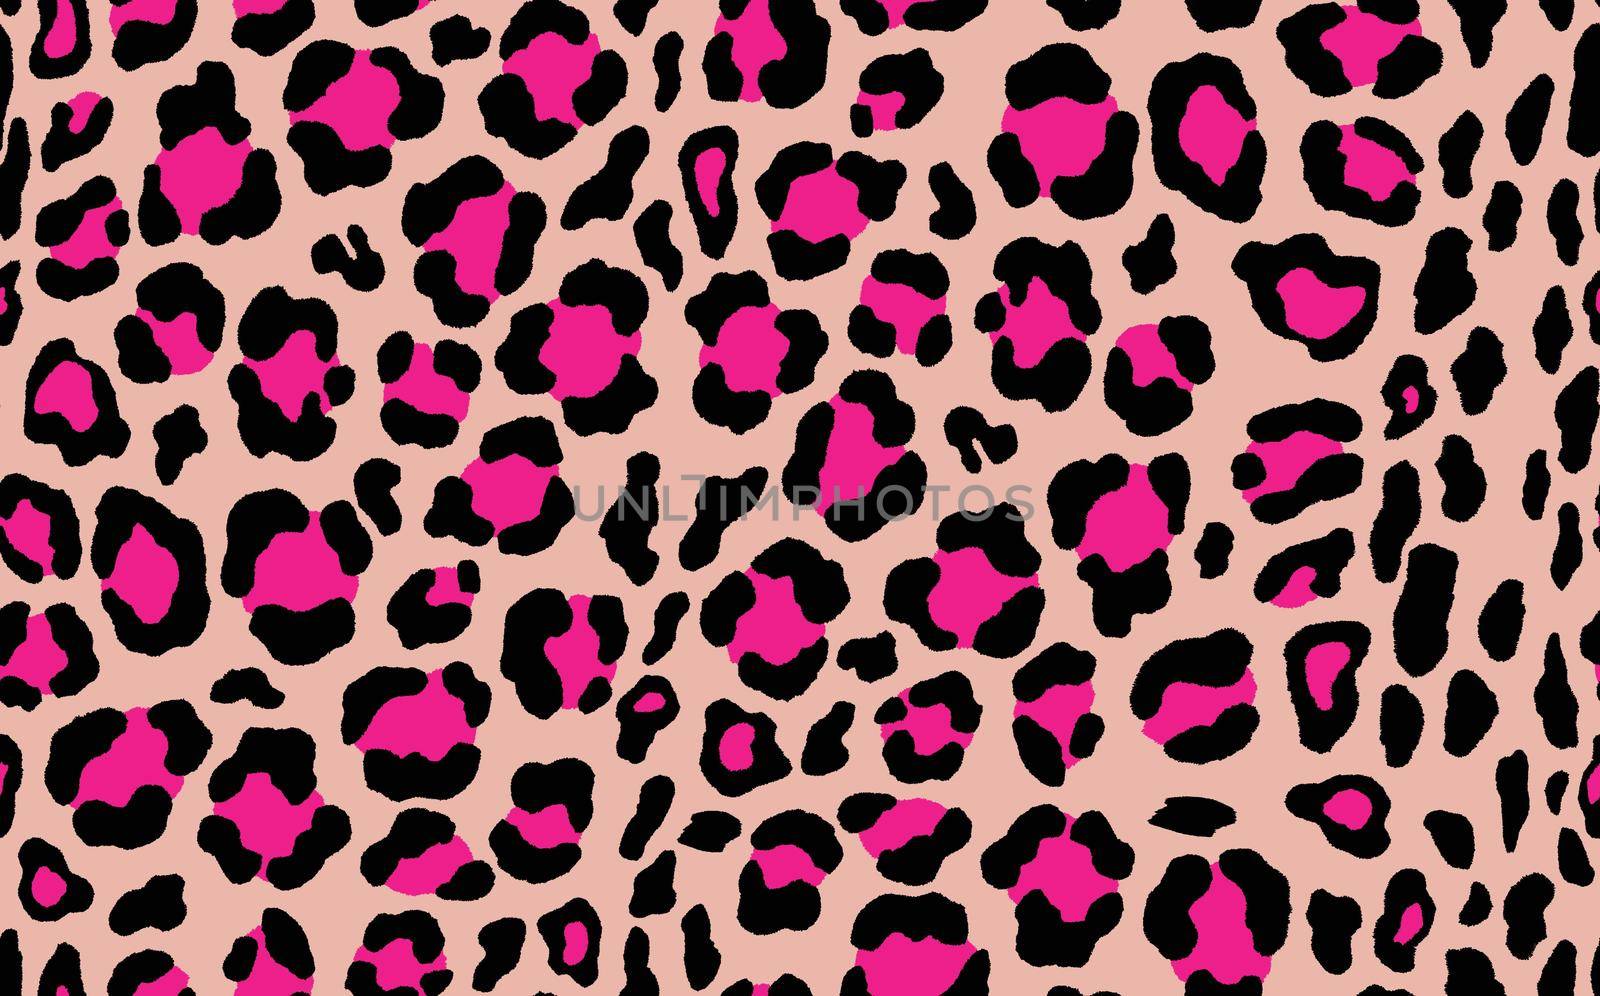 Abstract modern leopard seamless pattern. Animals trendy background. Beige and black decorative vector stock illustration for print, card, postcard, fabric, textile. Modern ornament of stylized skin by allaku